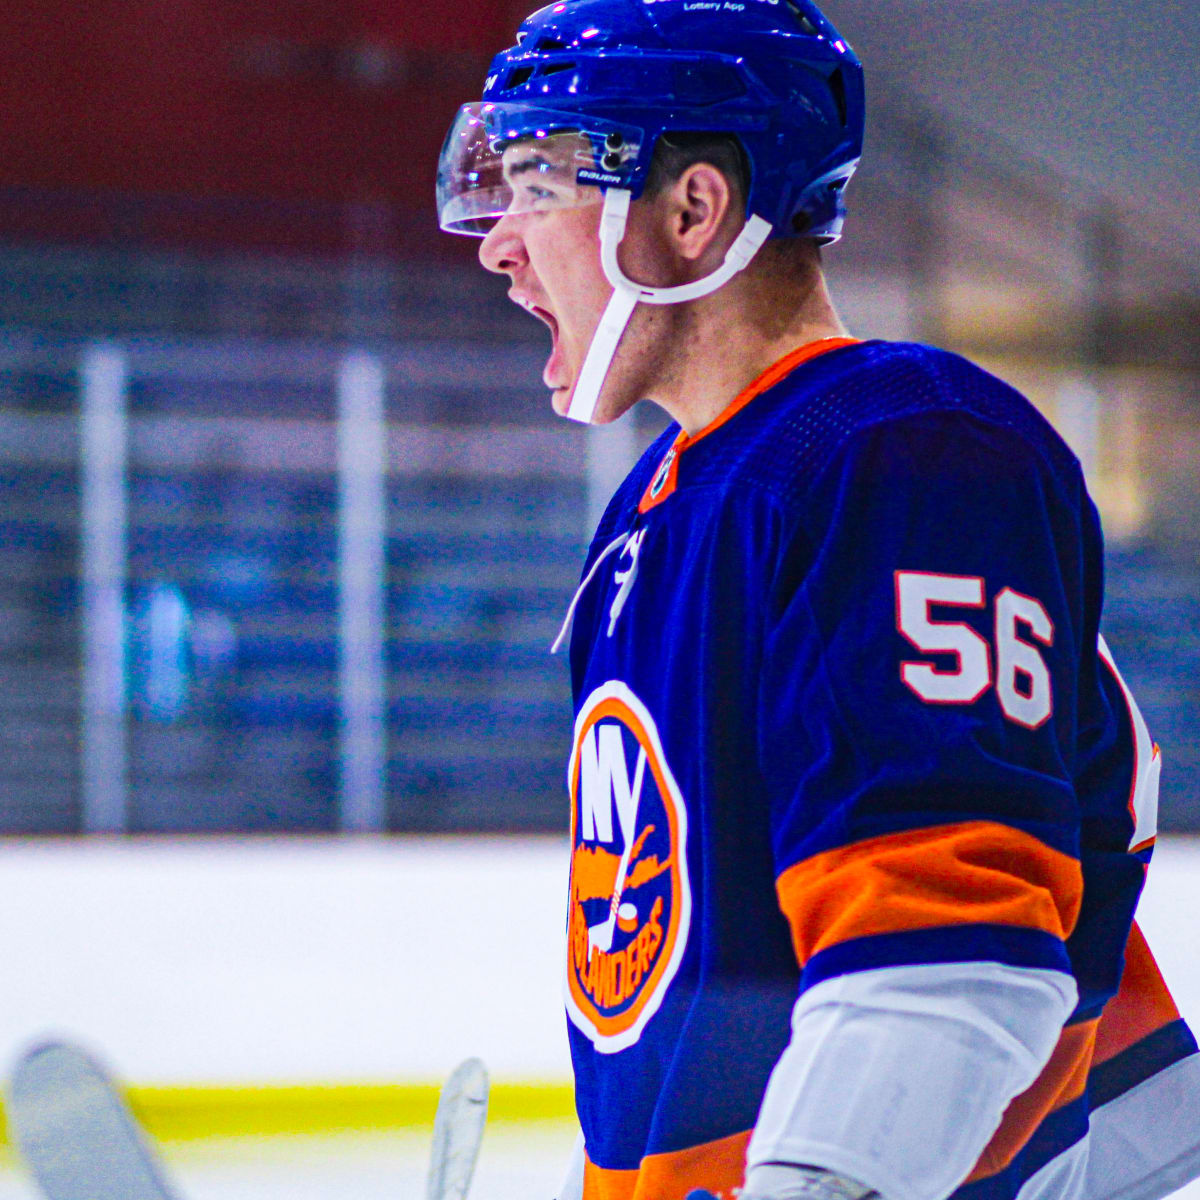 Who to keep an eye on at NY Islanders rookie camp